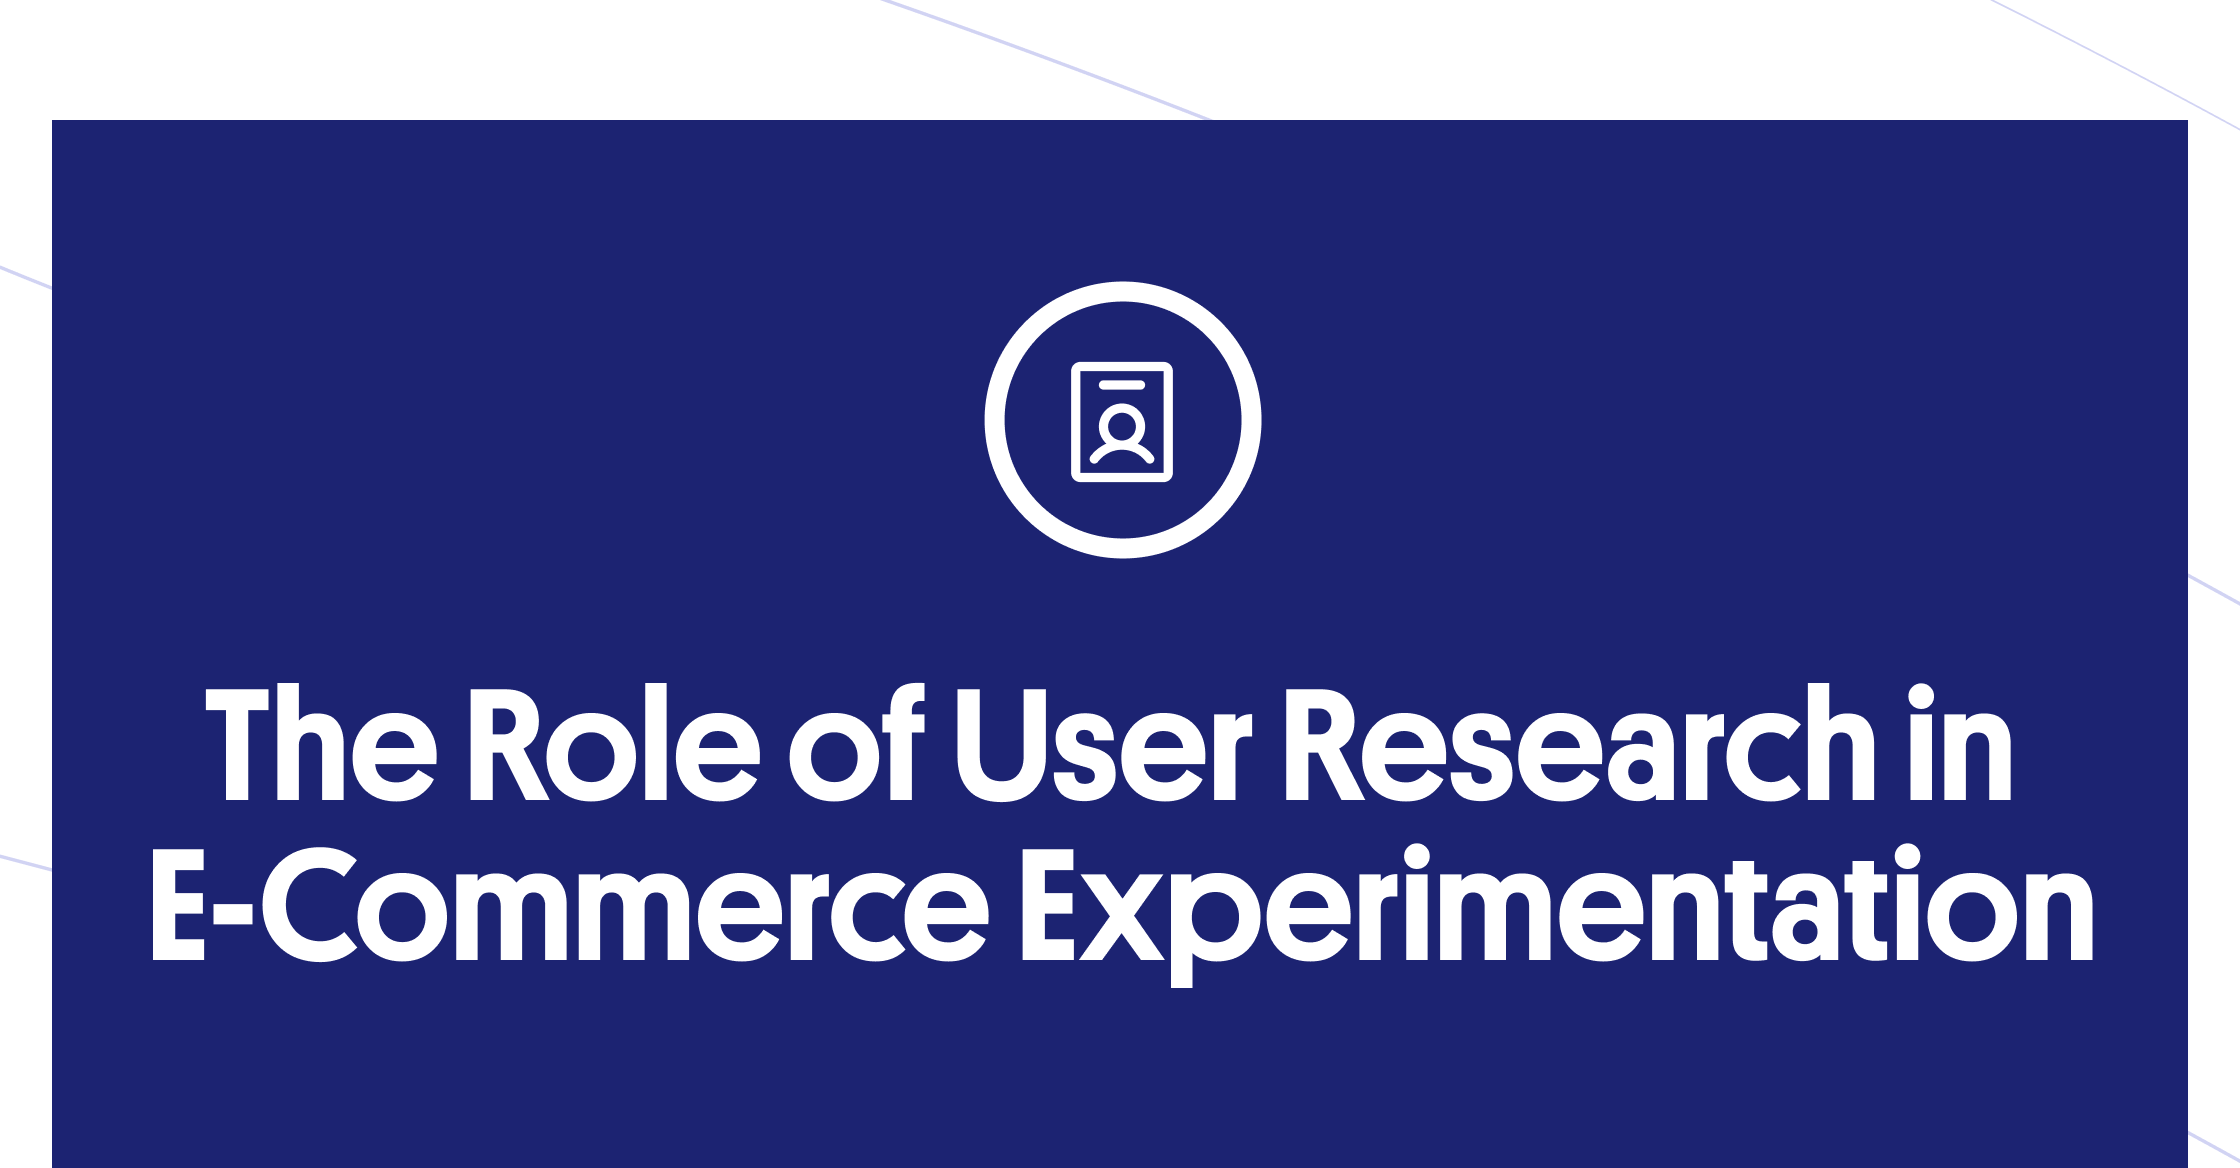 The role of user research in ecommerce experimentation